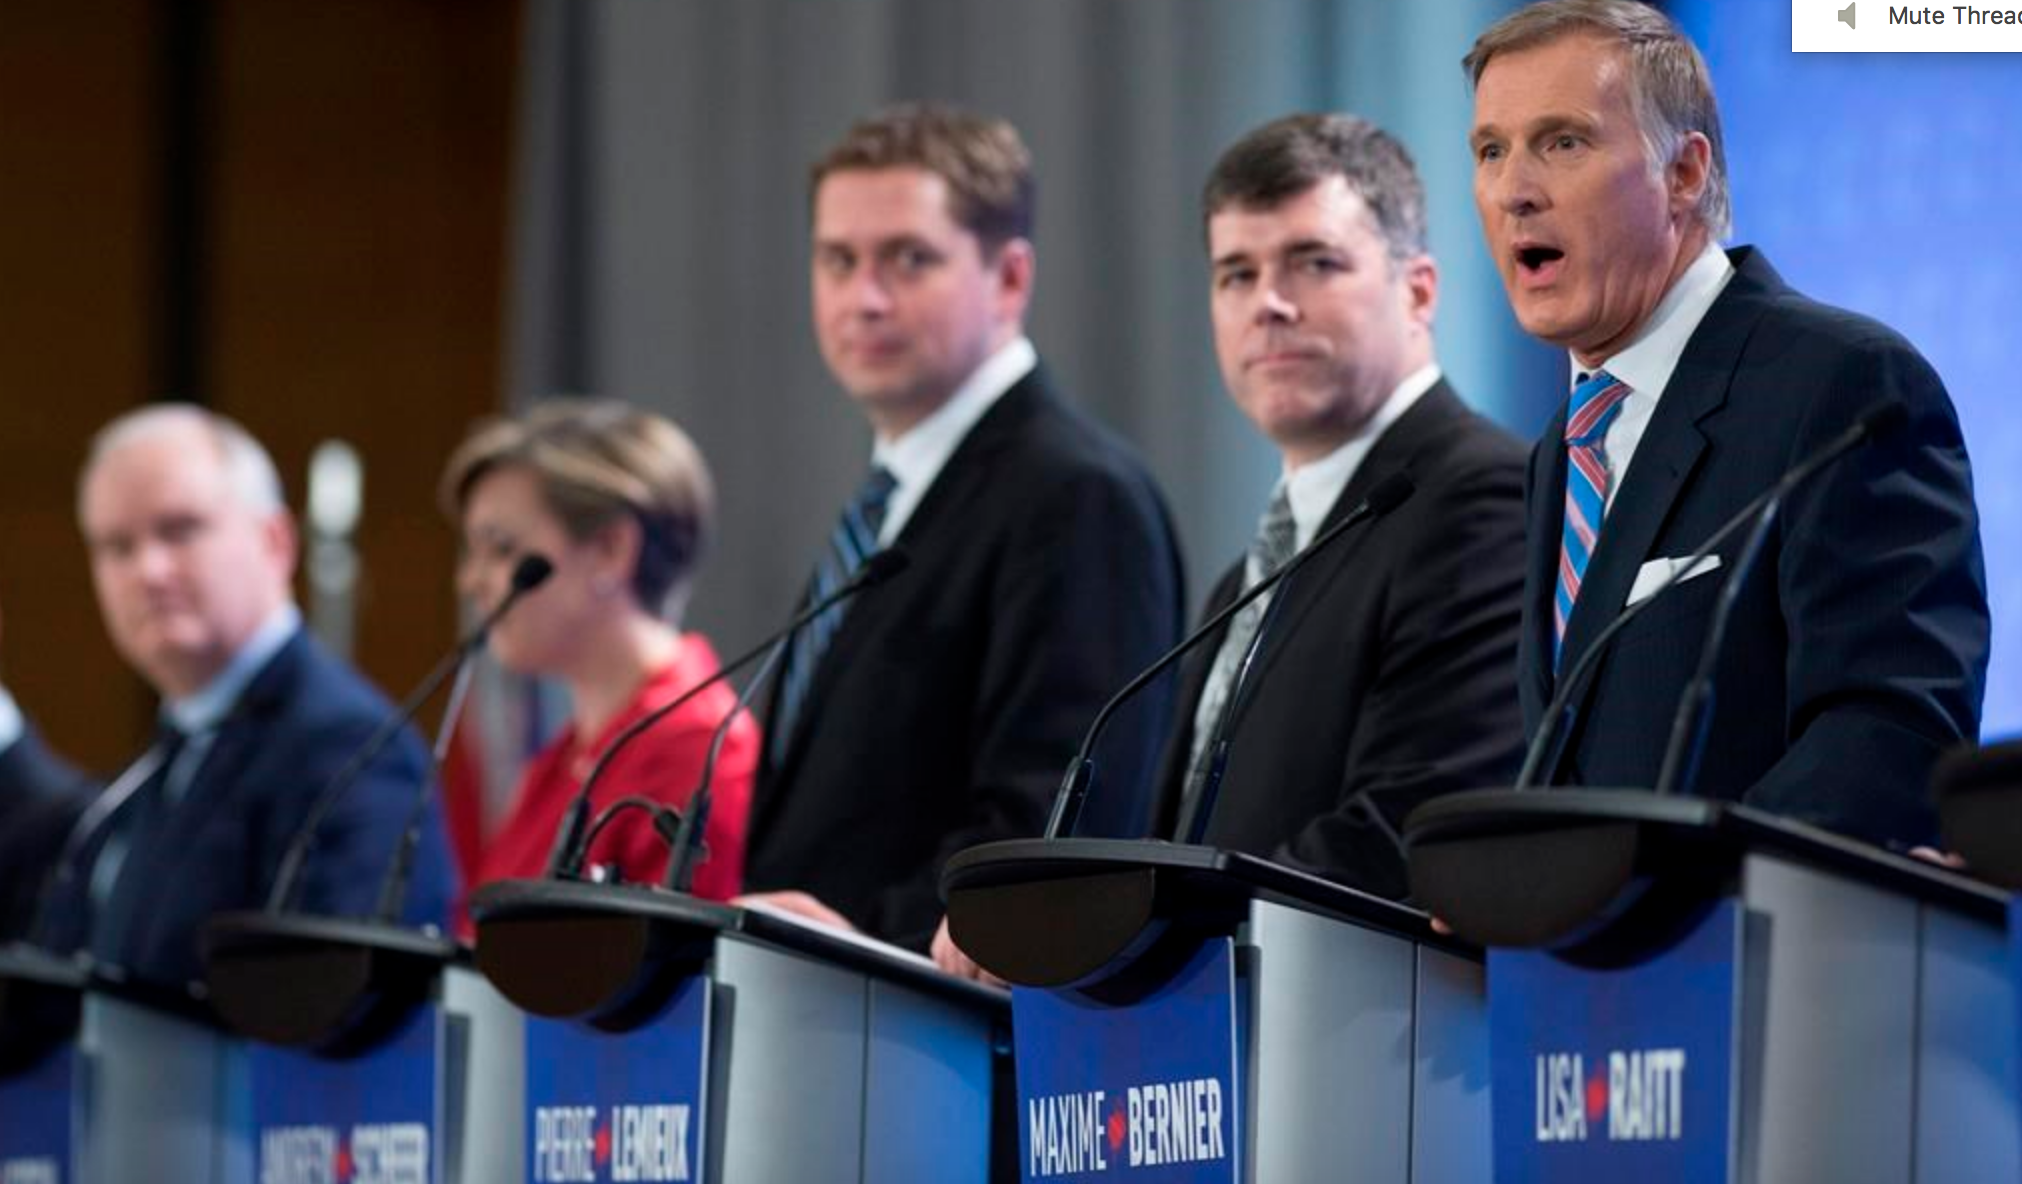 Conservative, NDP leadership races show struggle to define parties